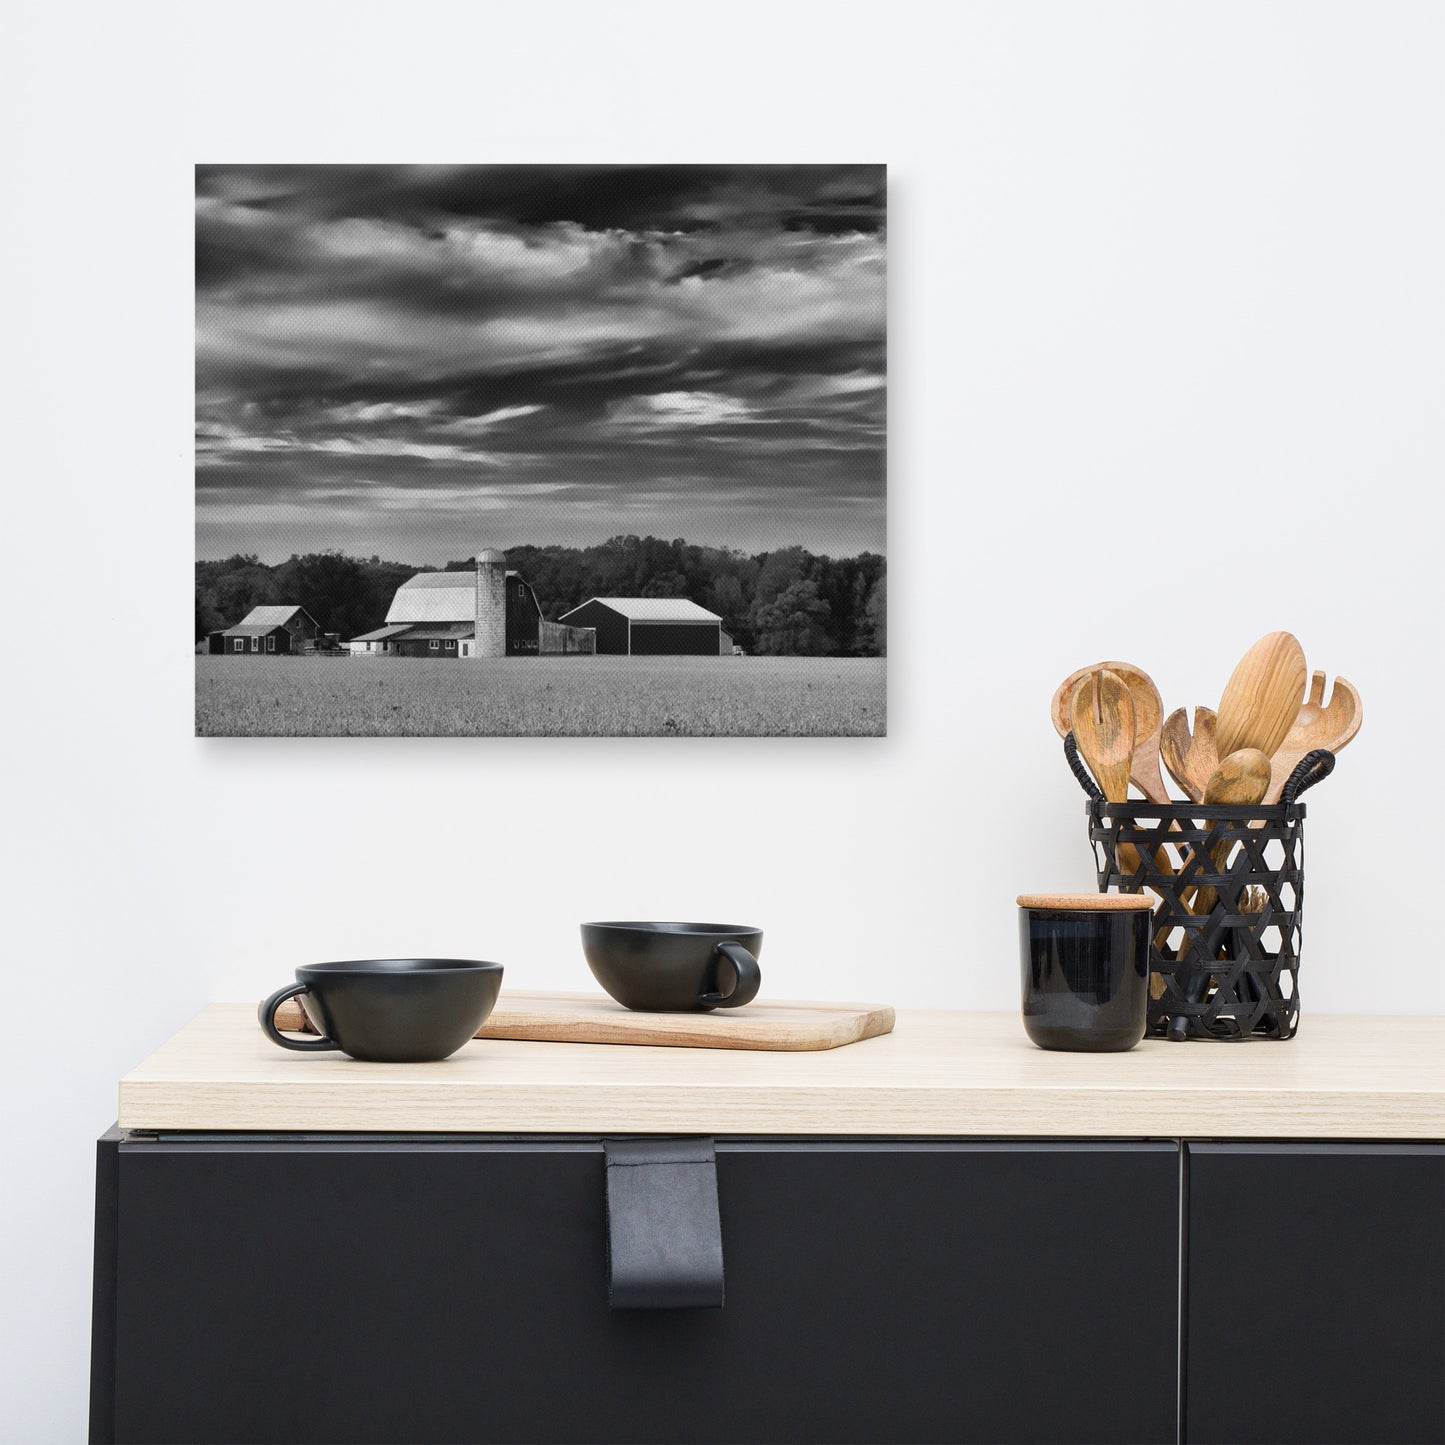 Barn in Field Black and White Rural Landscape Canvas Wall Art Prints